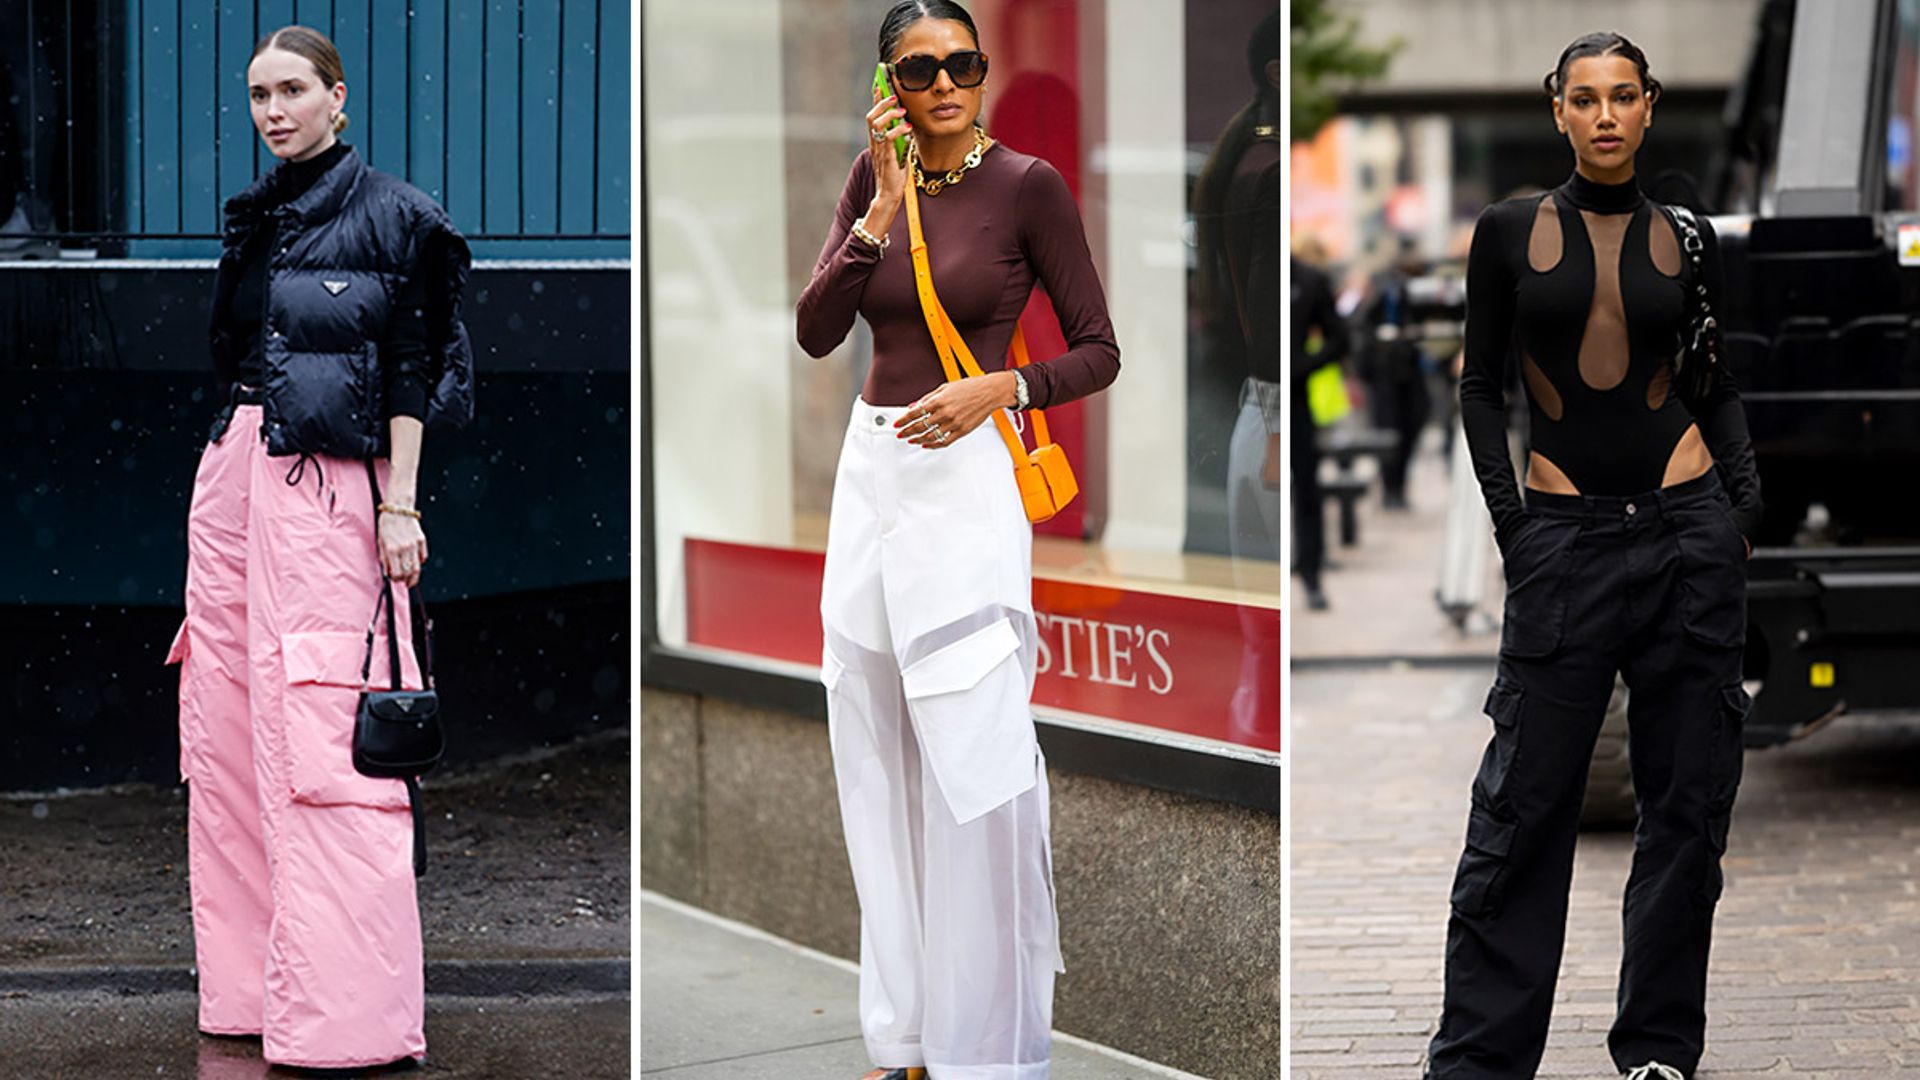 7 ways to style cargo pants that we are 100% going to try